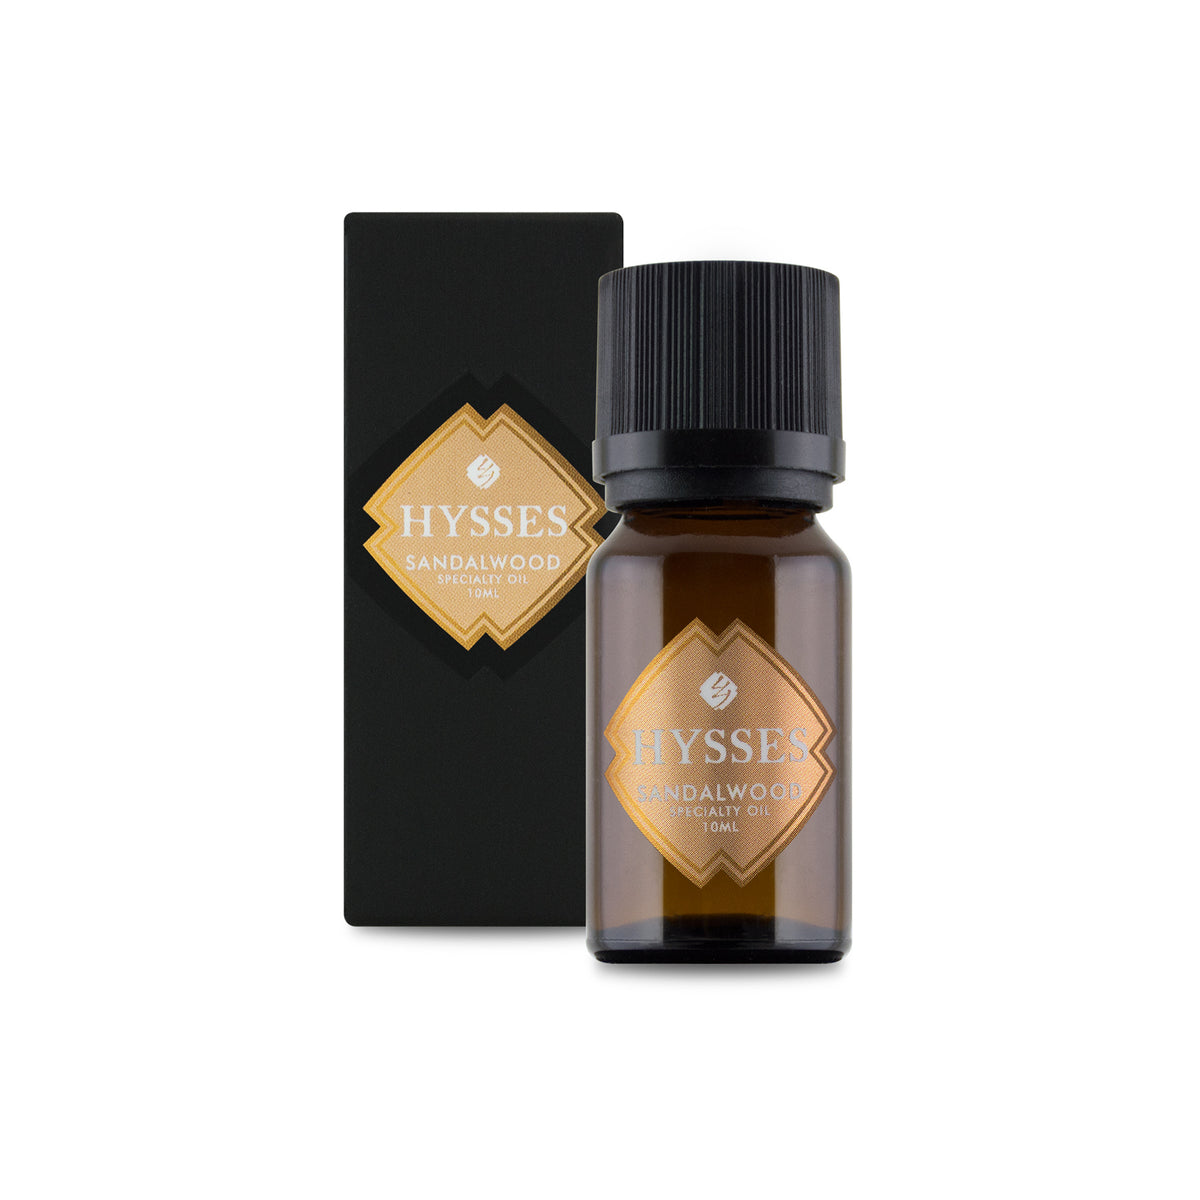 Specialty Oil Sandalwood Absolute - HYSSES